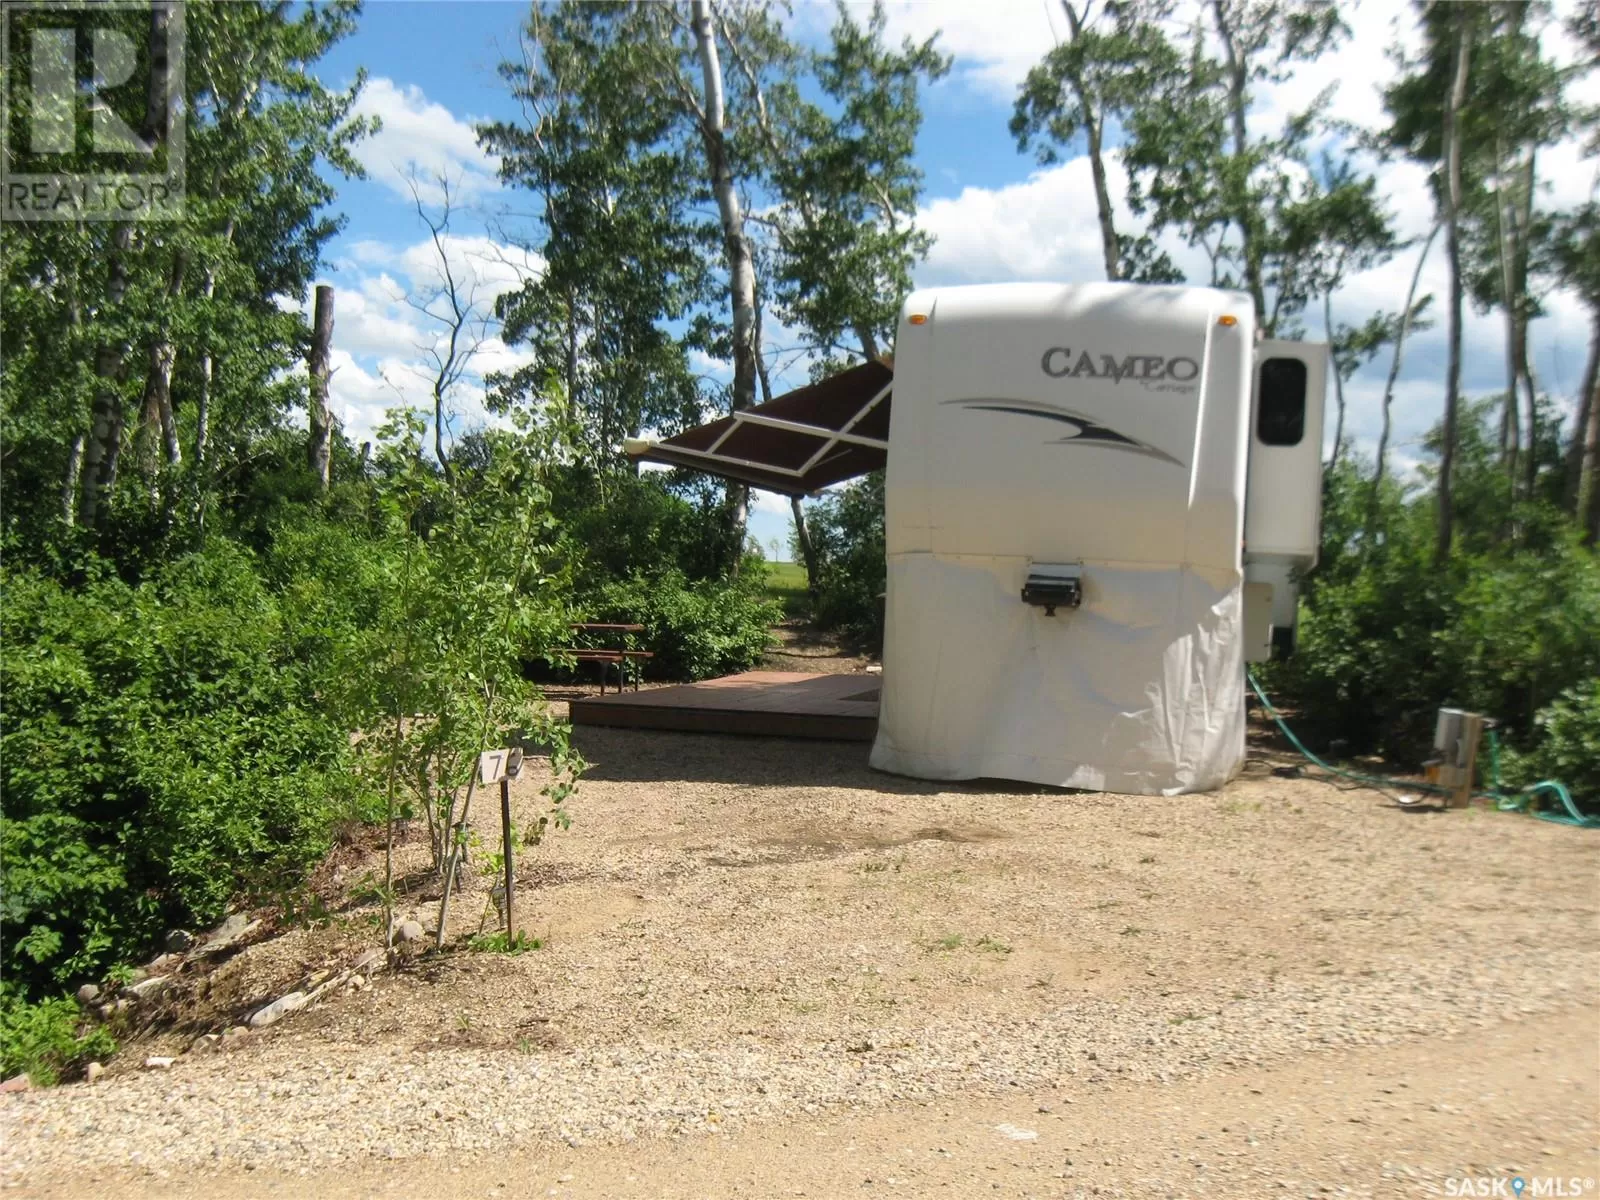 Unknown for rent: 76 Enchanted Forest Loop-deep Woods Rv Park #76, Wakaw Lake, Saskatchewan S0K 4P0